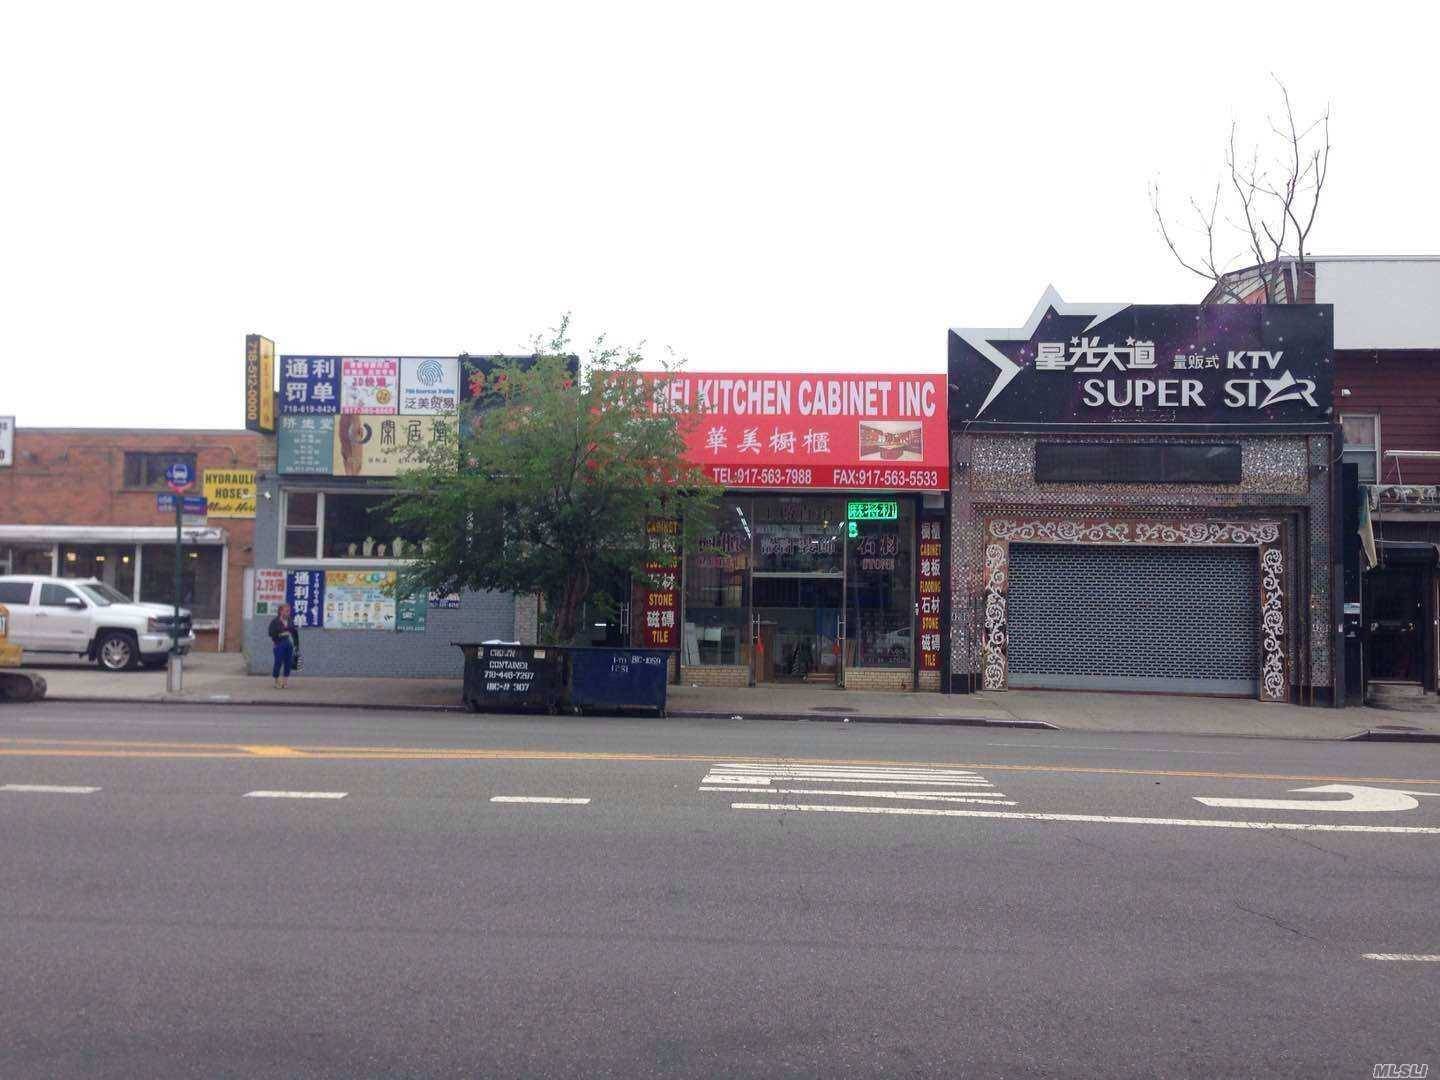 Good Commercial Unit On College Point Blvd In Flushing.